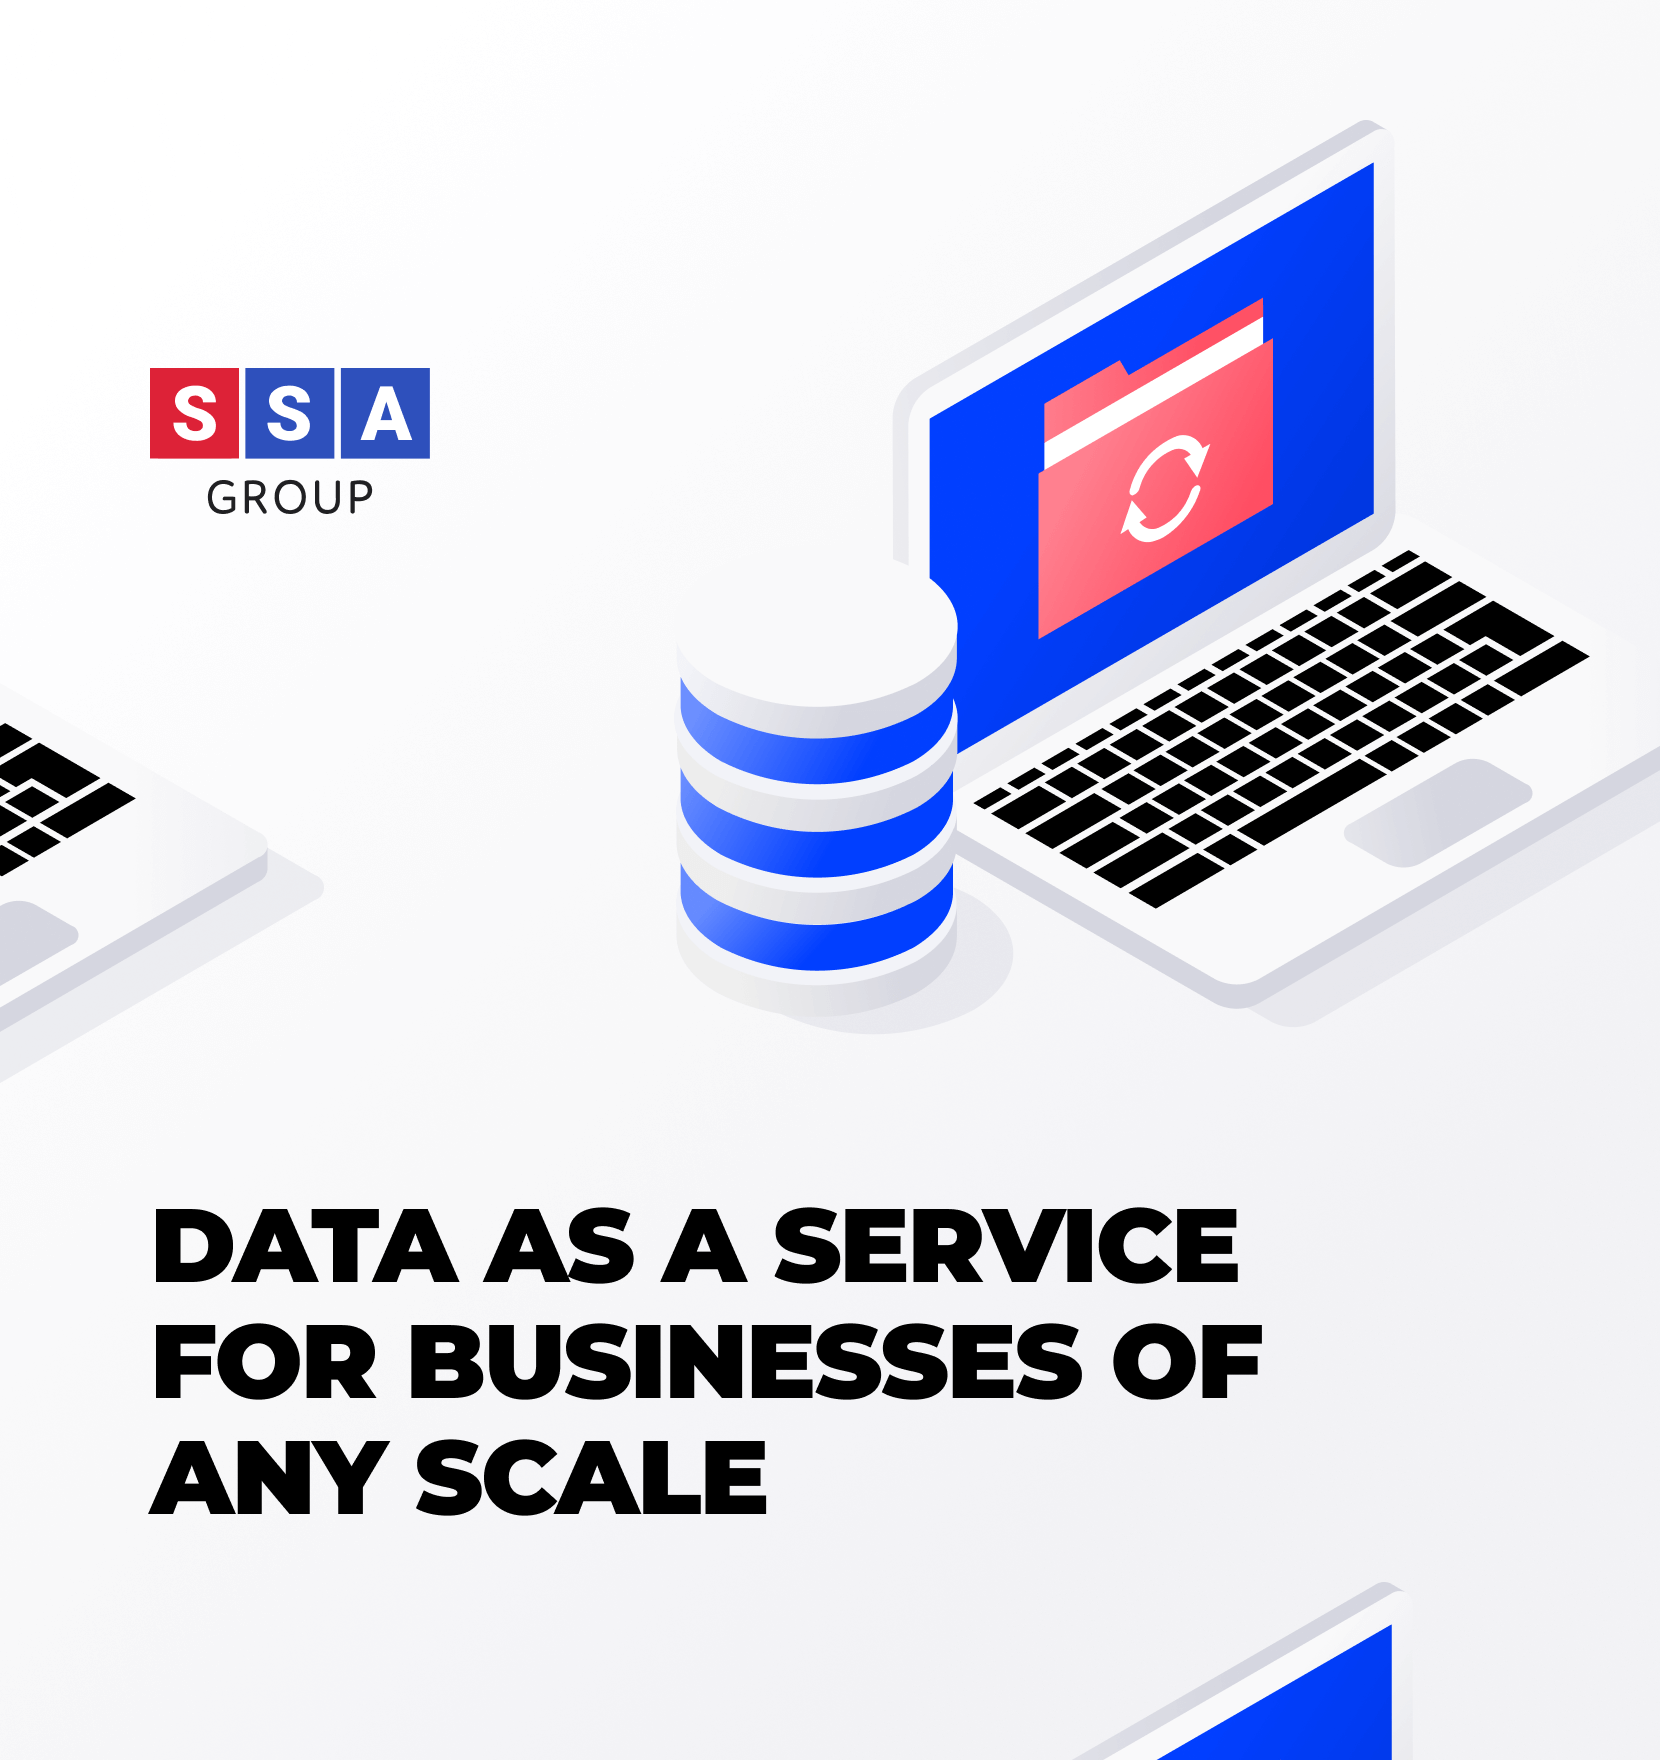 SSA Group releases a new solution - Datasets